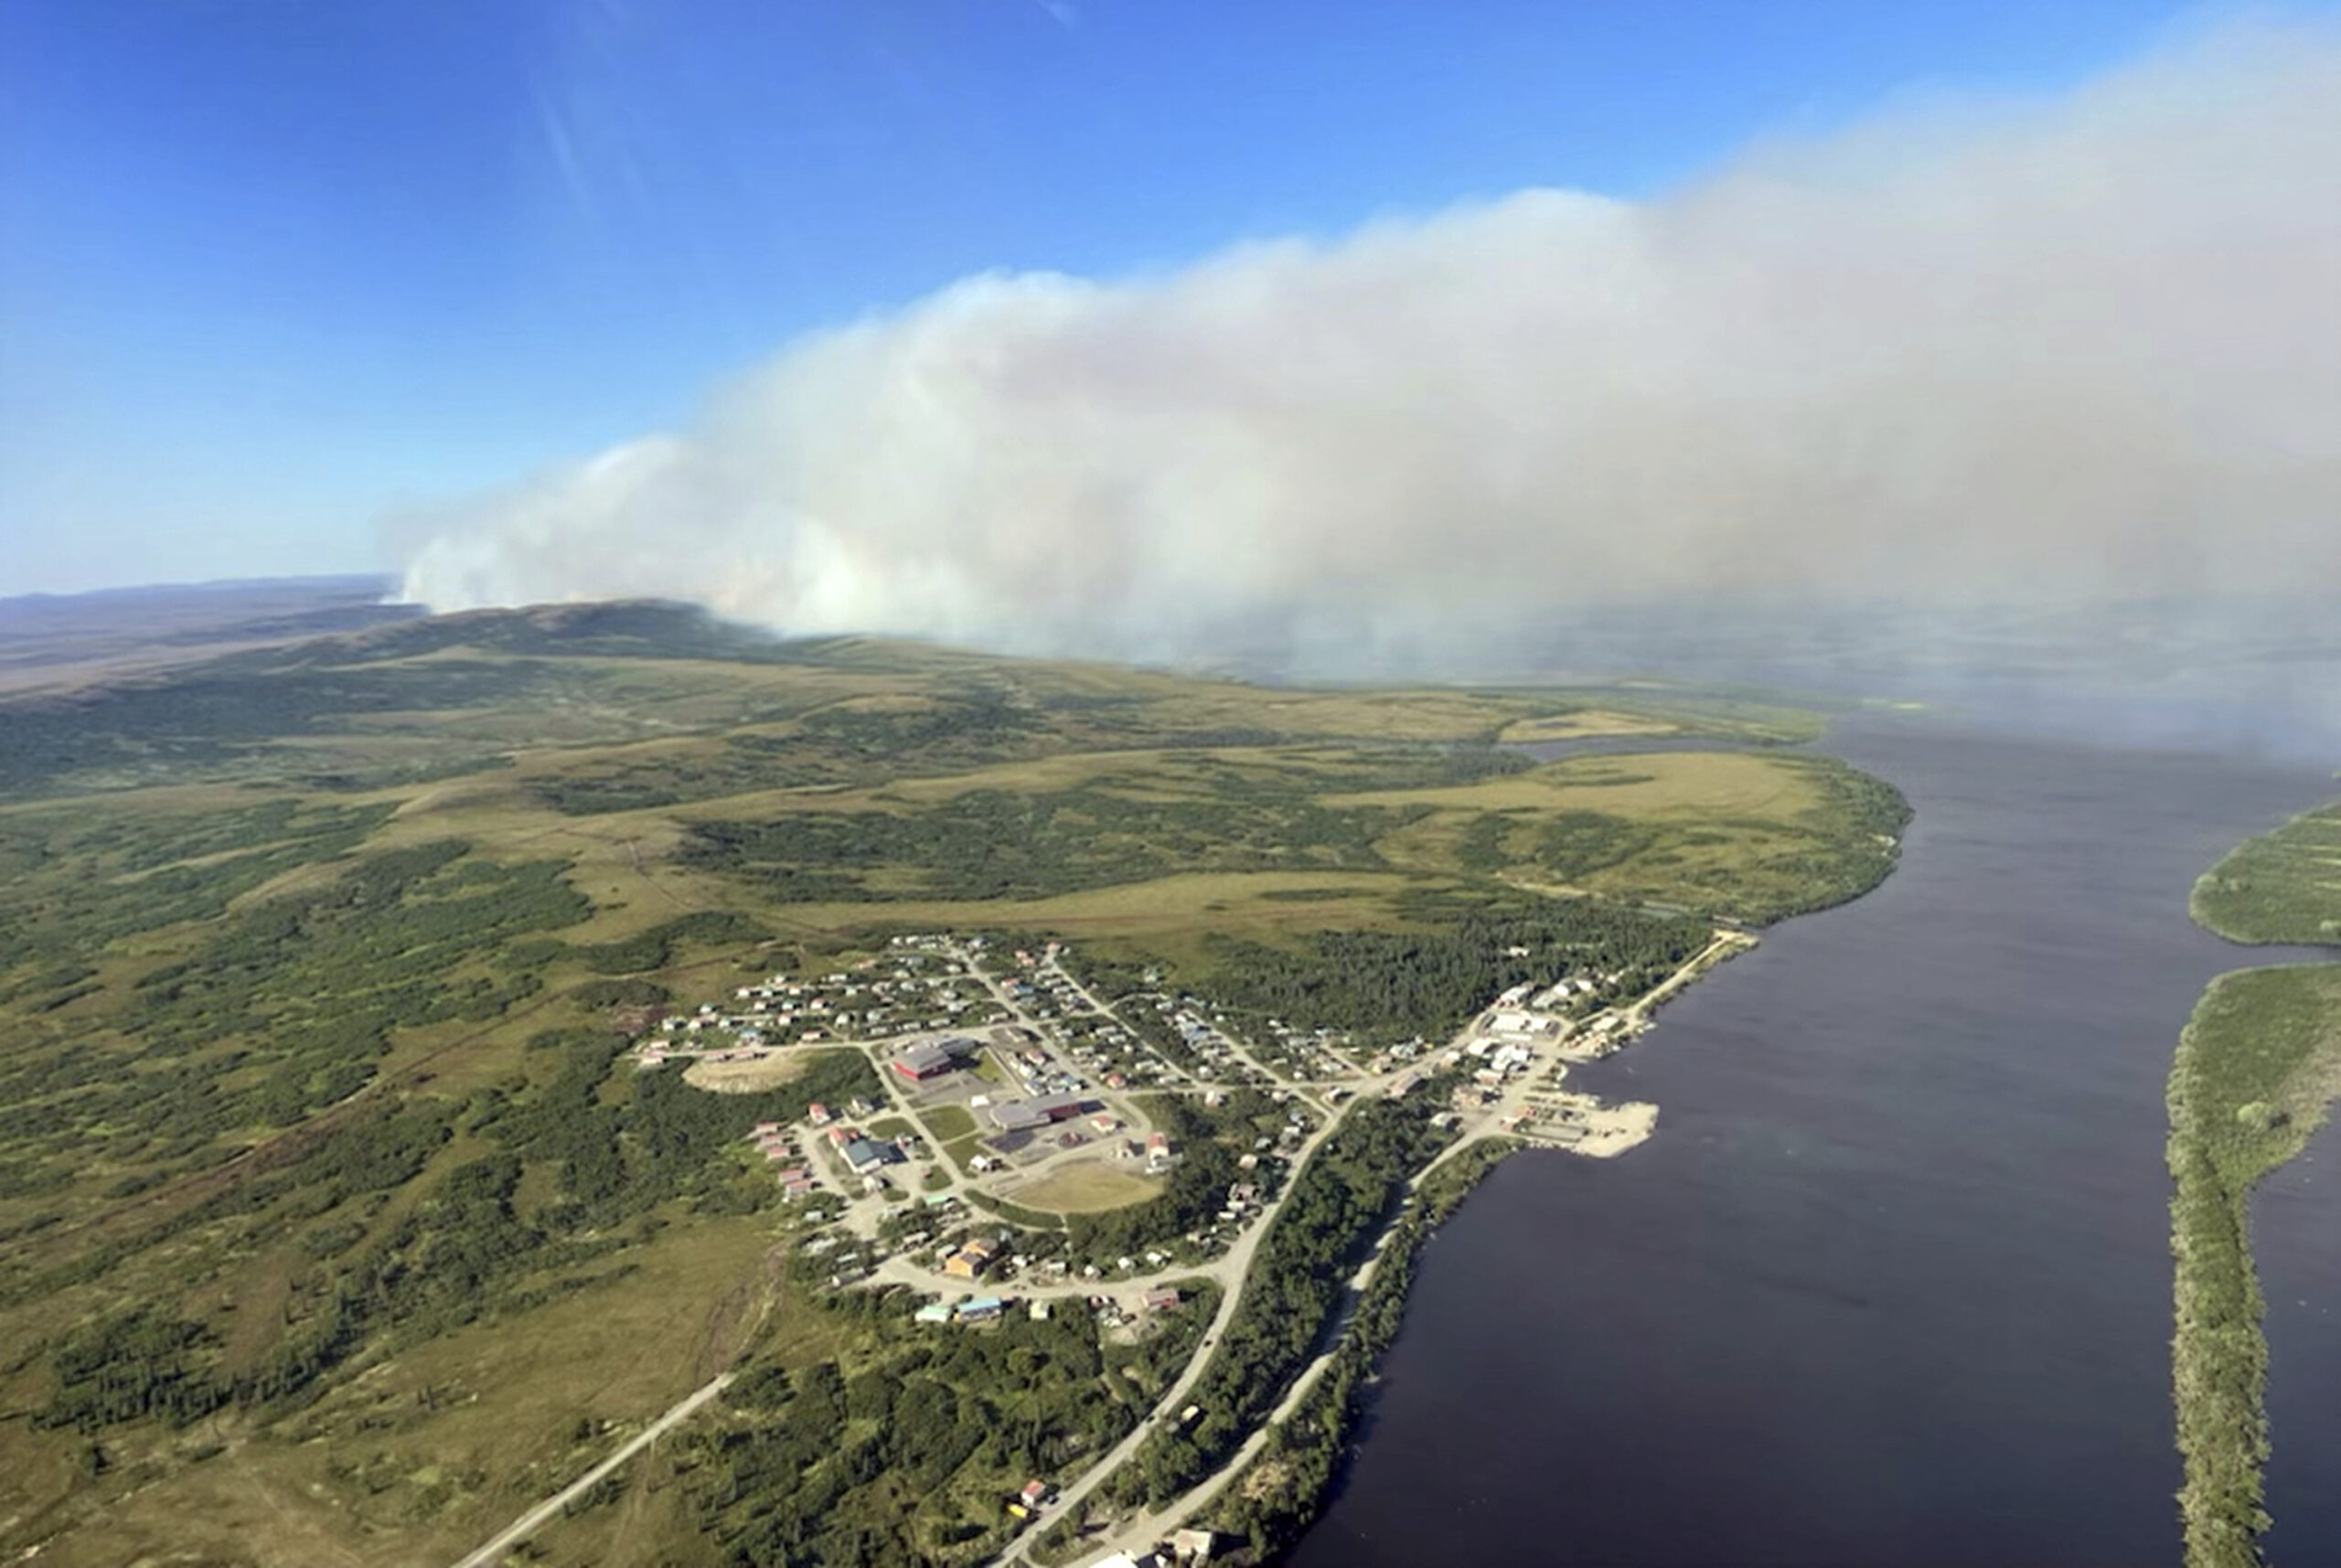 FILE - This aerial photo provided by the Bureau of Land Management Alaska Fire Service shows a tundra fire burning near the community of St. Mary's, Alaska, on June 10, 2022. Alaska's remarkable wildfire season includes over 530 blazes that have burned an area more than three times the size of Rhode Island, with nearly all the impacts, including dangerous breathing conditions from smoke, attributed to fires started by lightning. (Ryan McPherson/Bureau of Land Management Alaska Fire Service via AP, File)